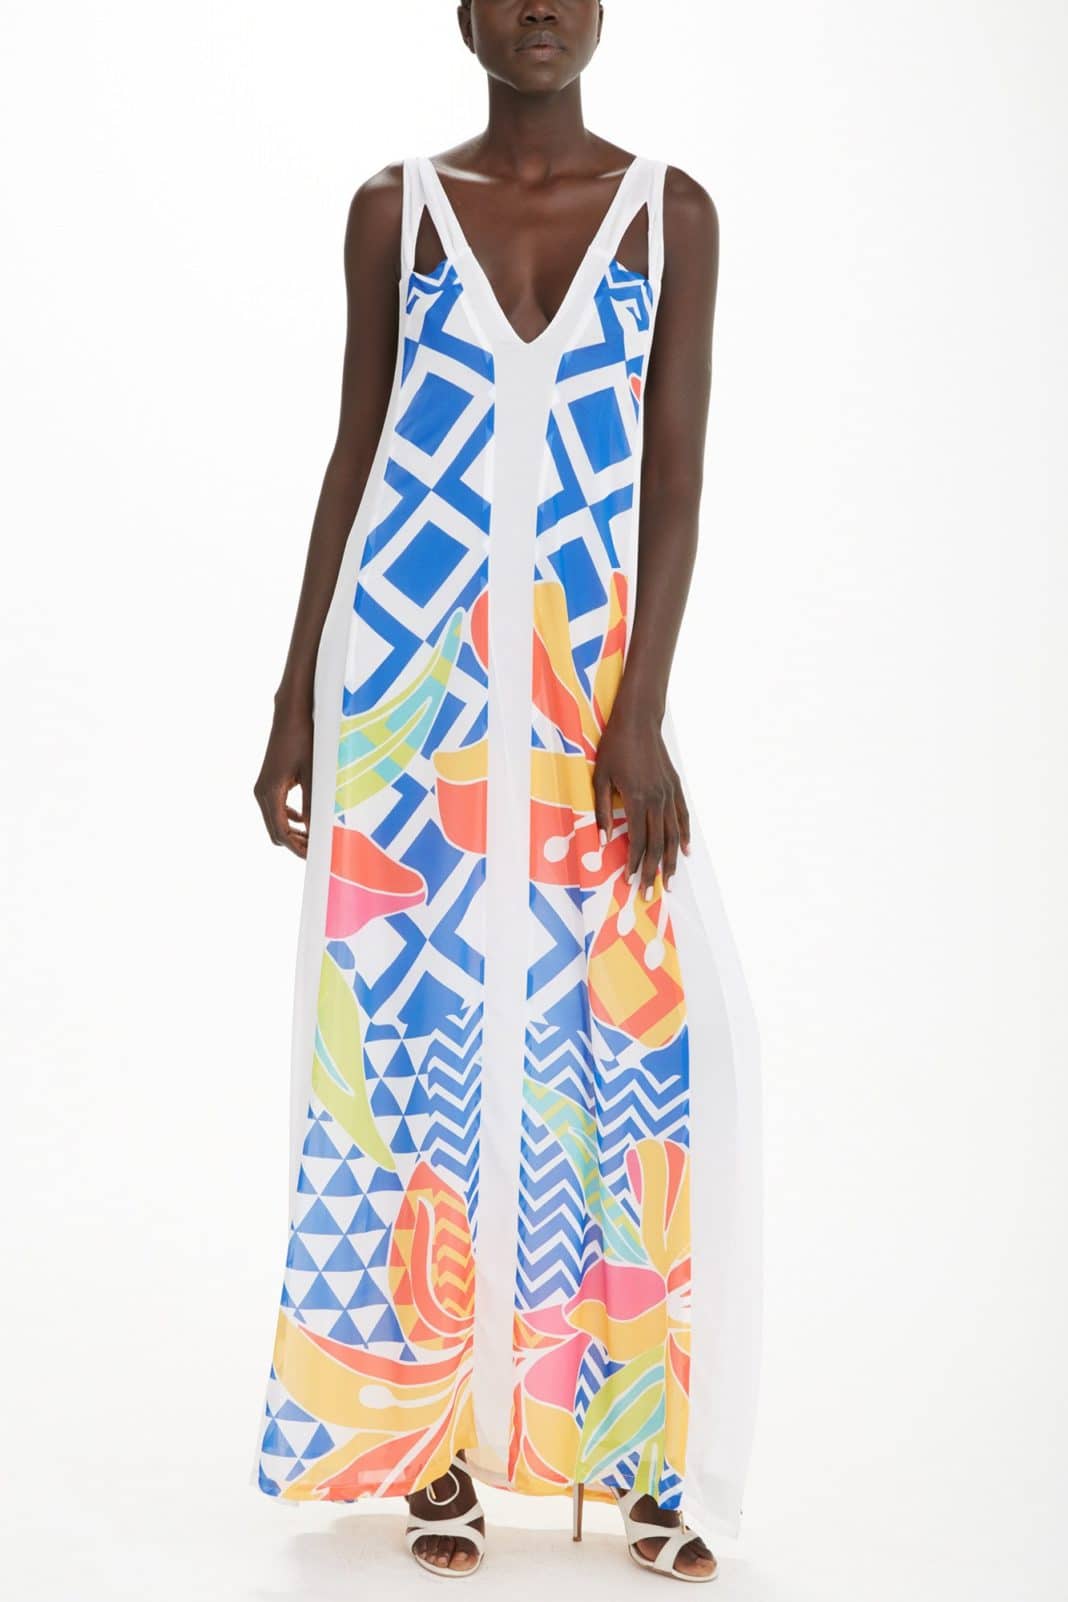 Start-Up Answers the Call to Bring High-End Designers from the African ...